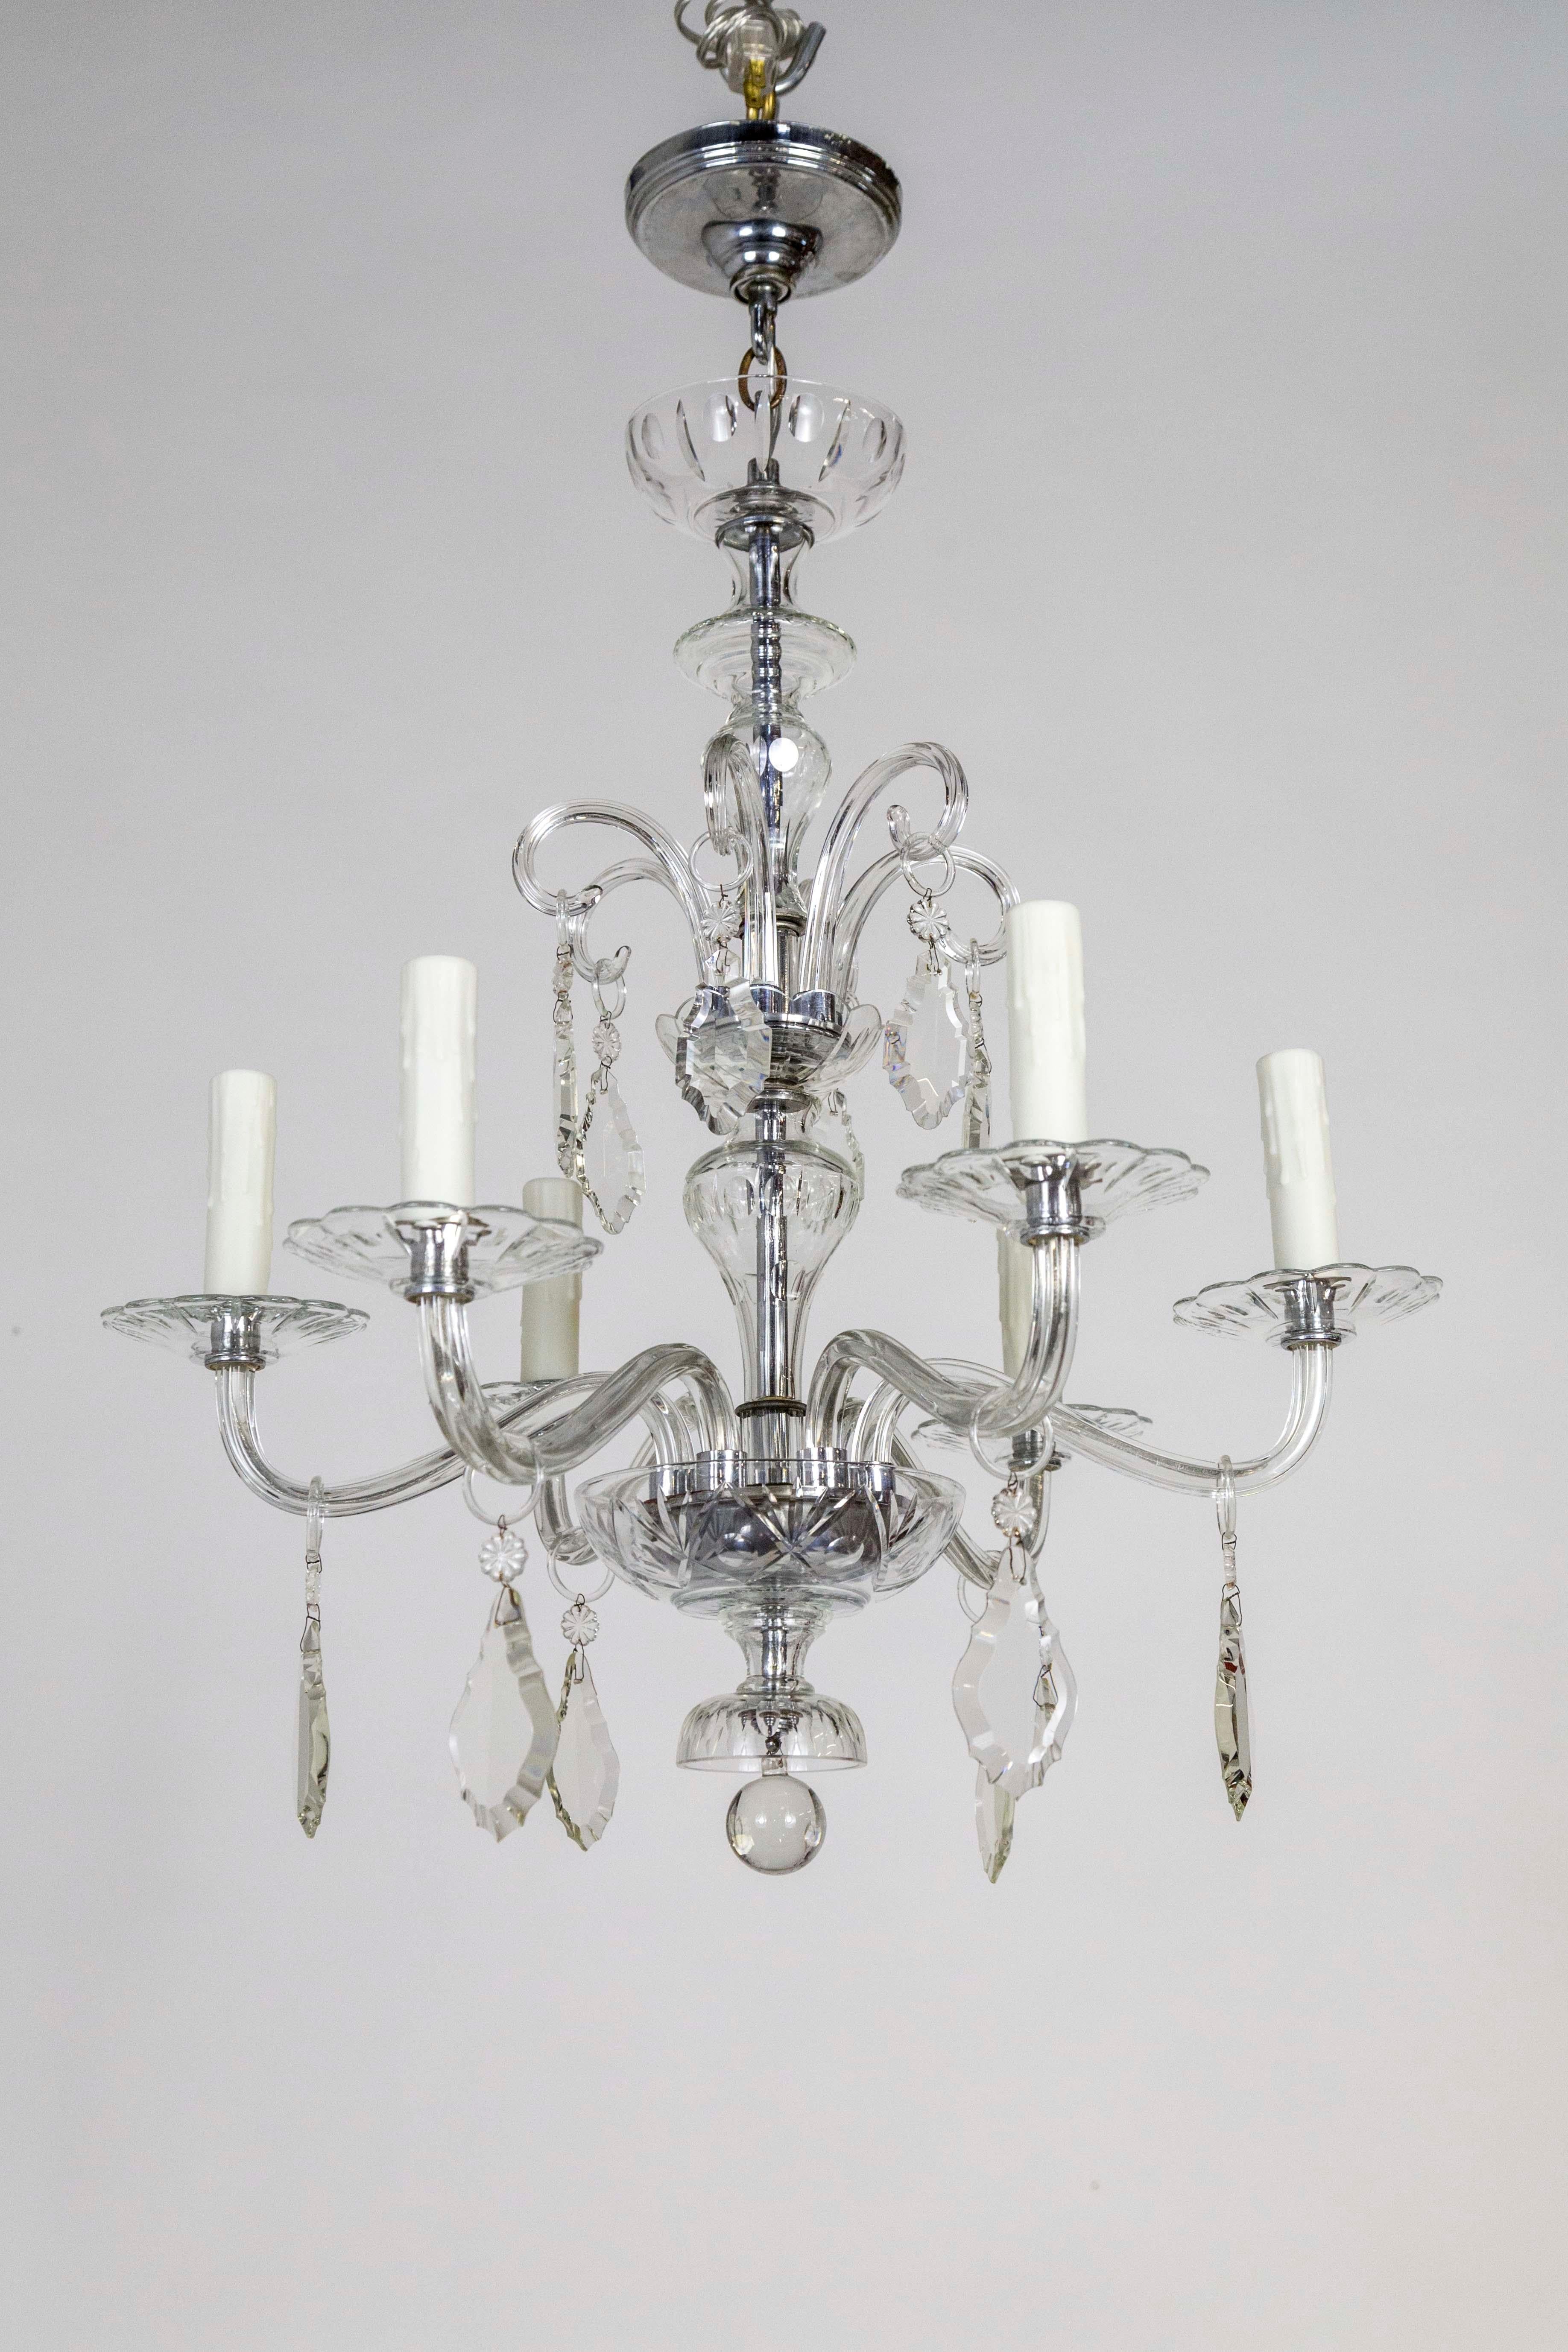 Petite 1920s Glass & Crystal Chandelier with Chrome Accents 4